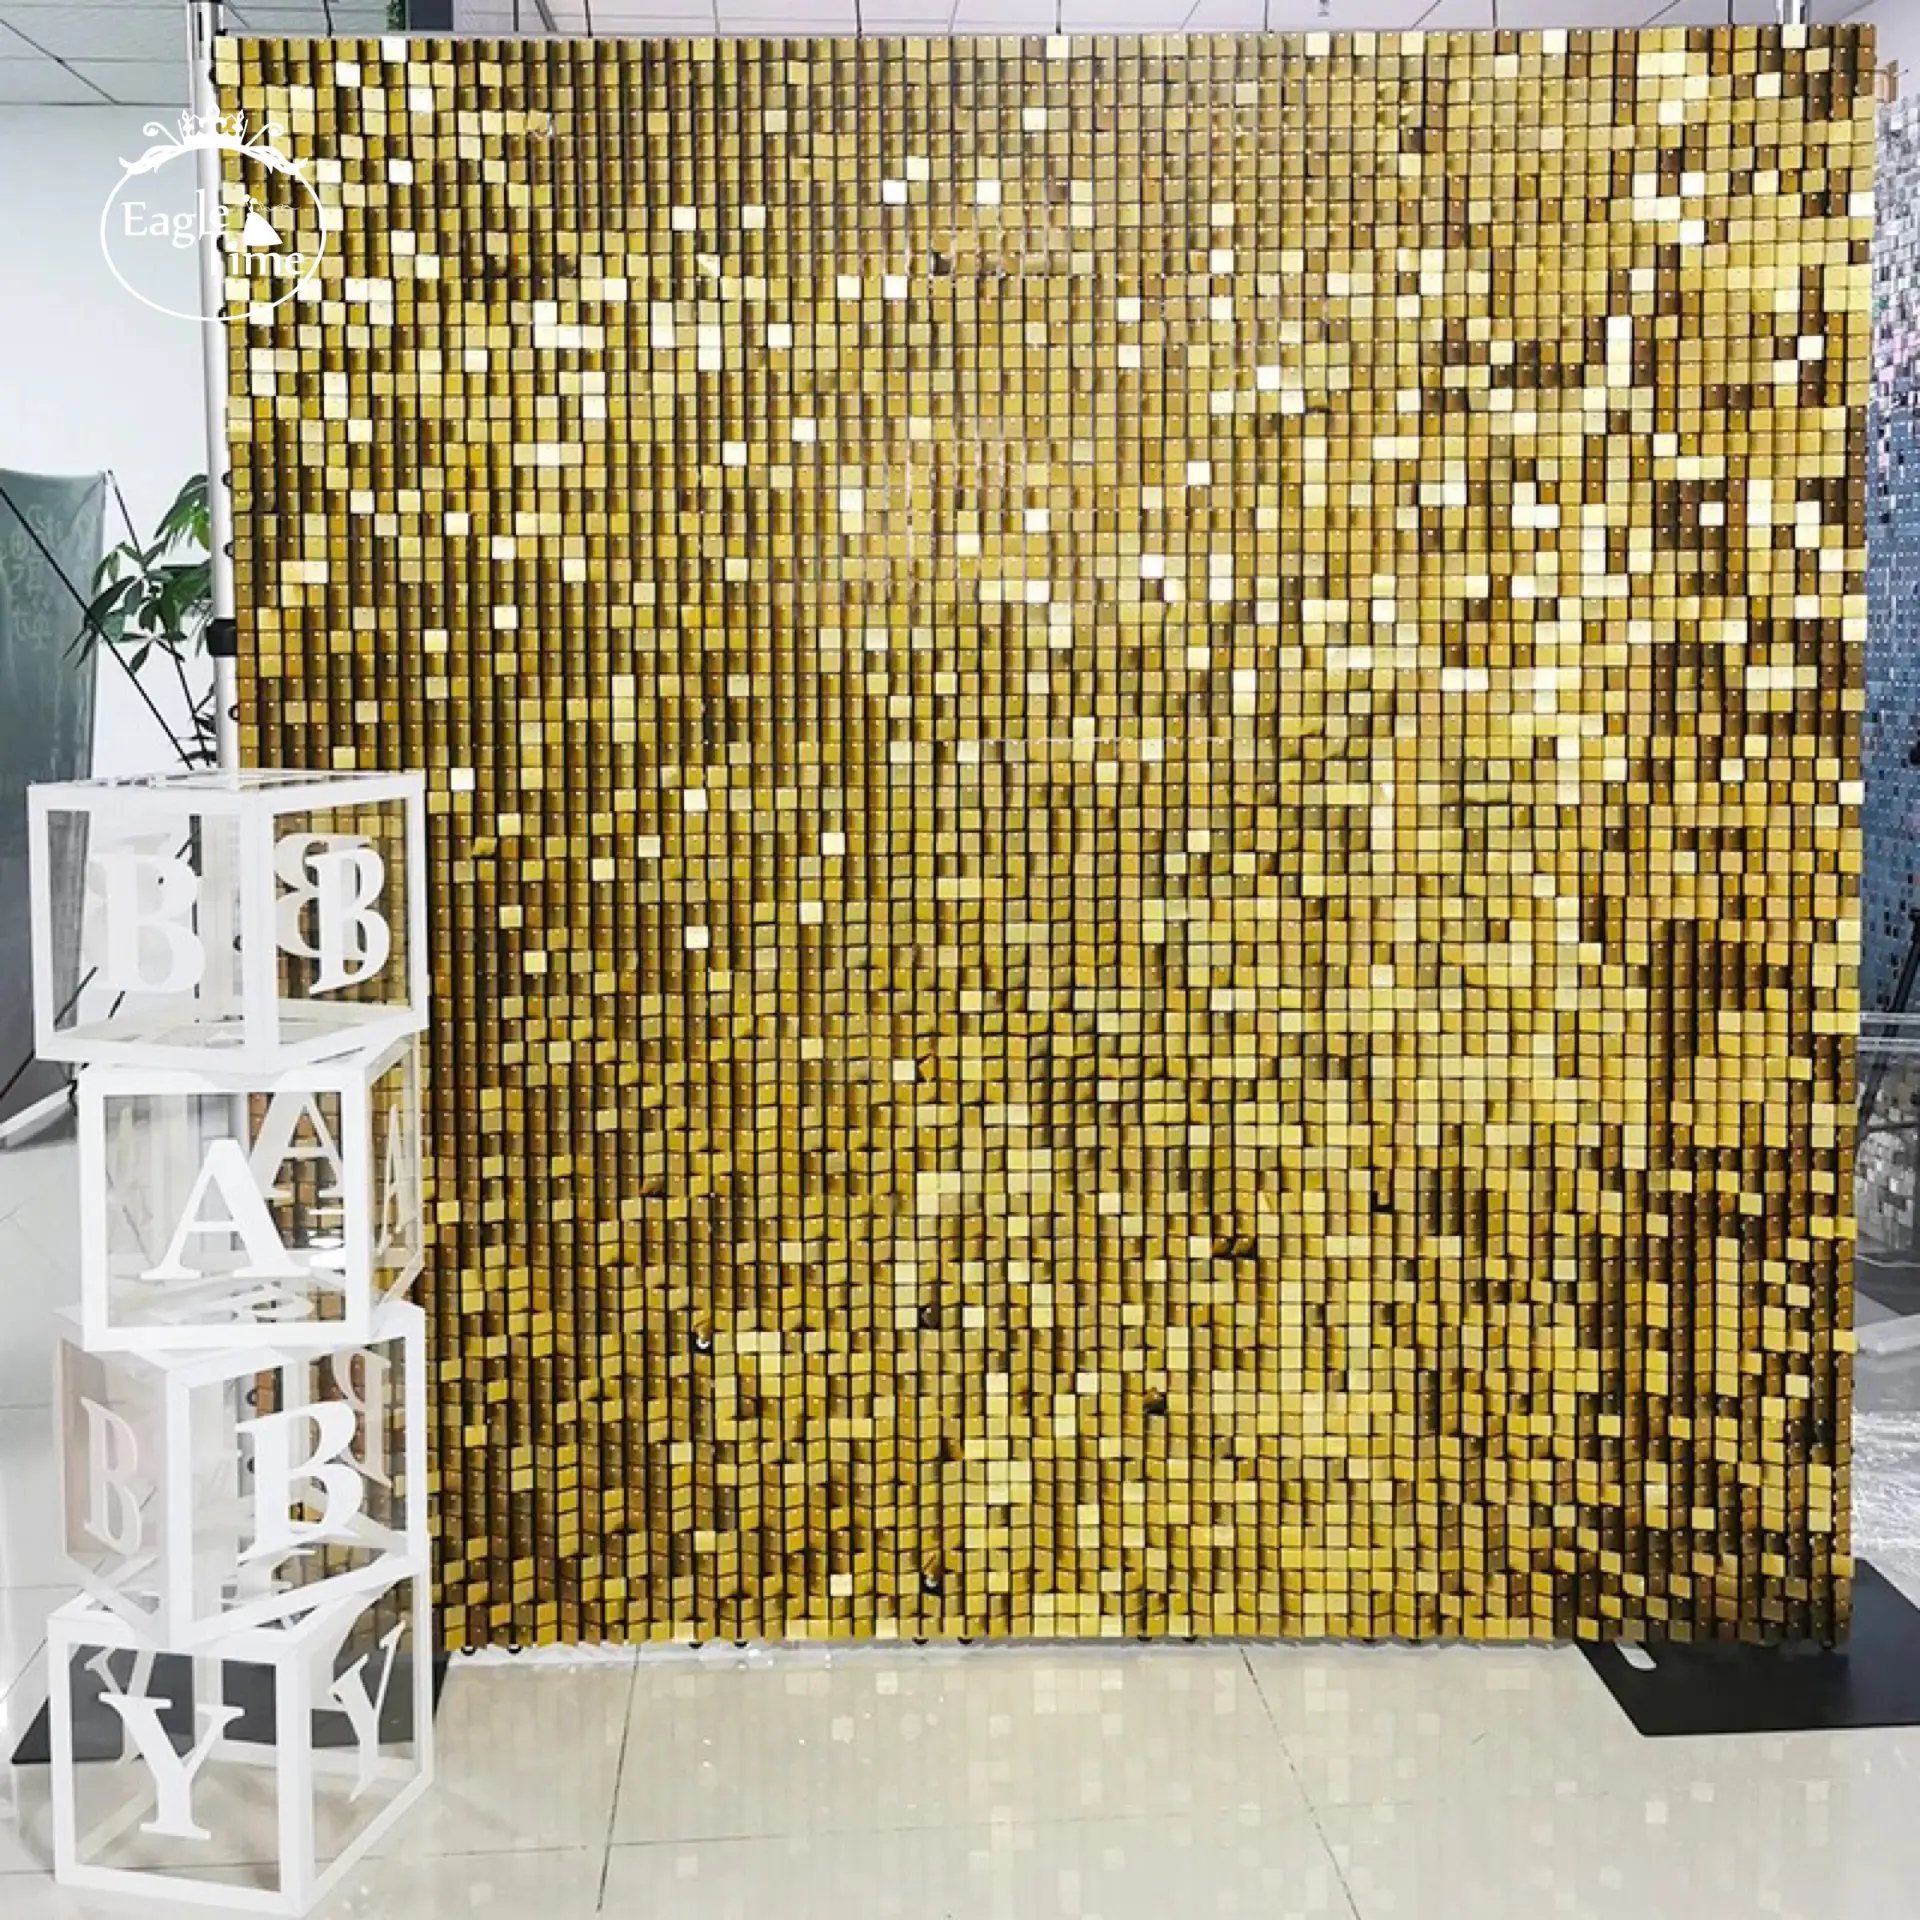 2022 hot sale gold glitter backdrop sequin wall panel wedding banquet party birthday decoration